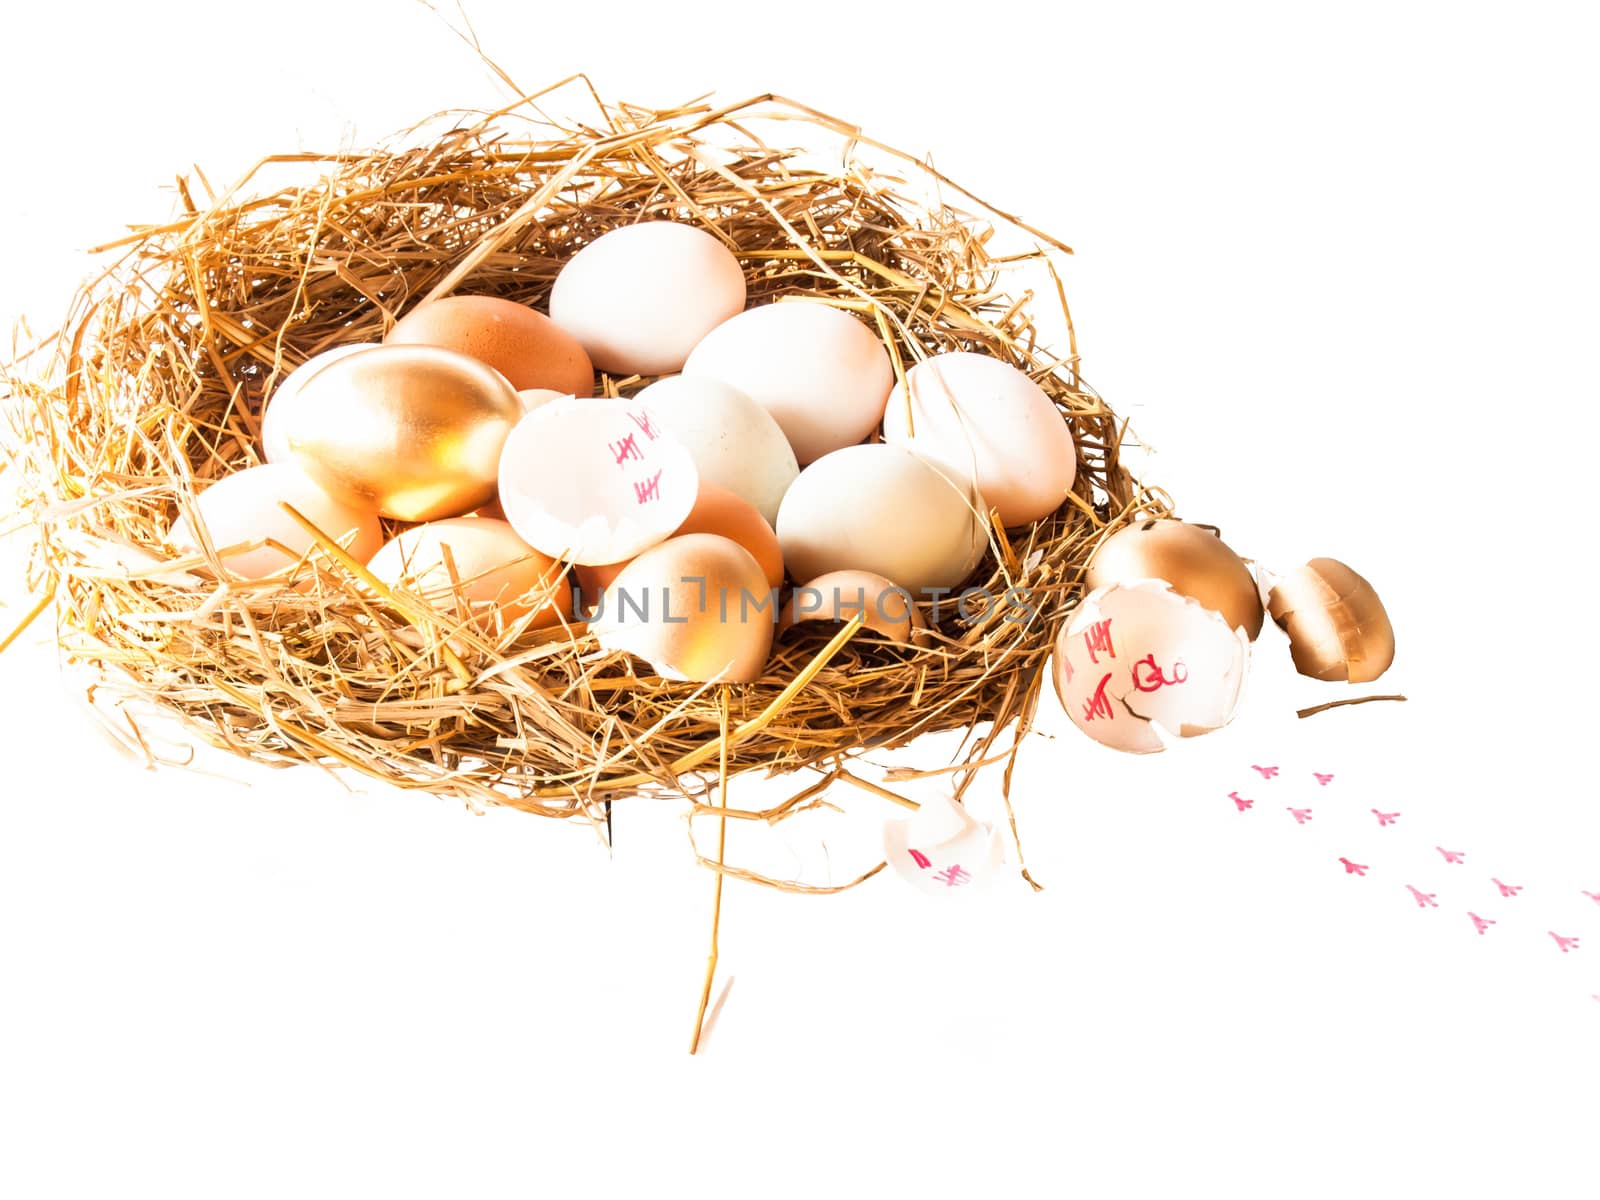 a pile of brown and white and gold eggs  by wmitrmatr